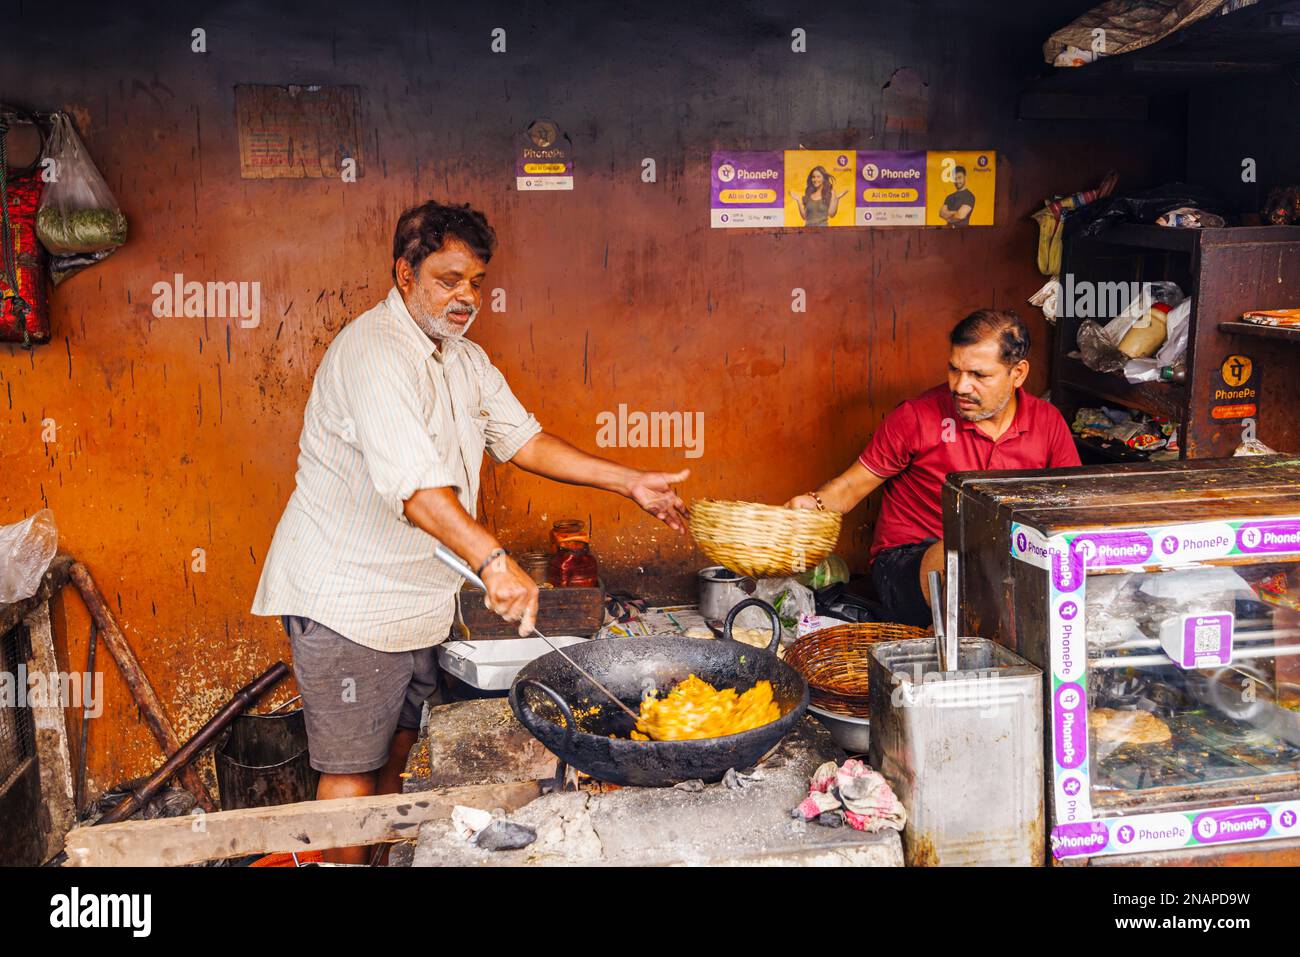 Street food being prepared and cooked in a roadside shop in Fariapukur, Shyam Bazar, a suburb of Kolkata, West Bengal, India Stock Photo